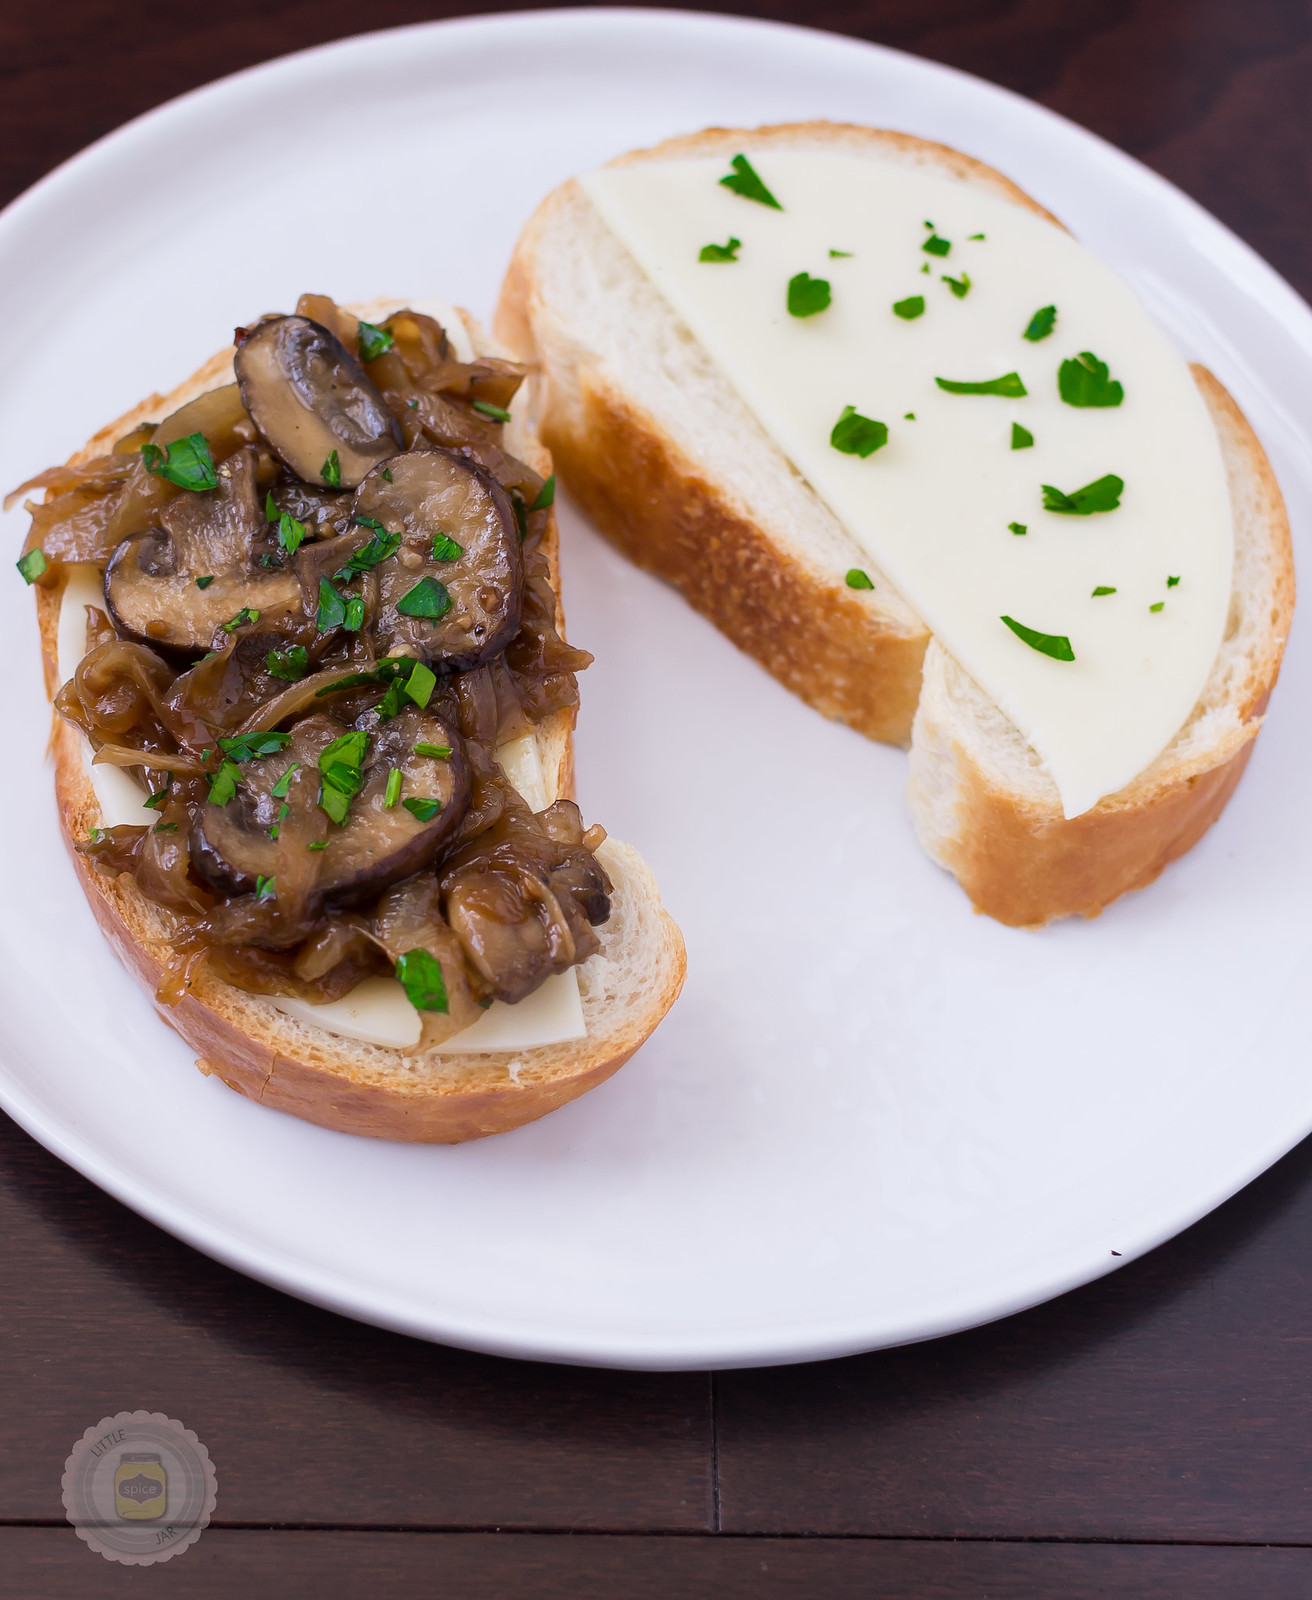 bread with cheese, caramelized onion and mushrooms before grilling